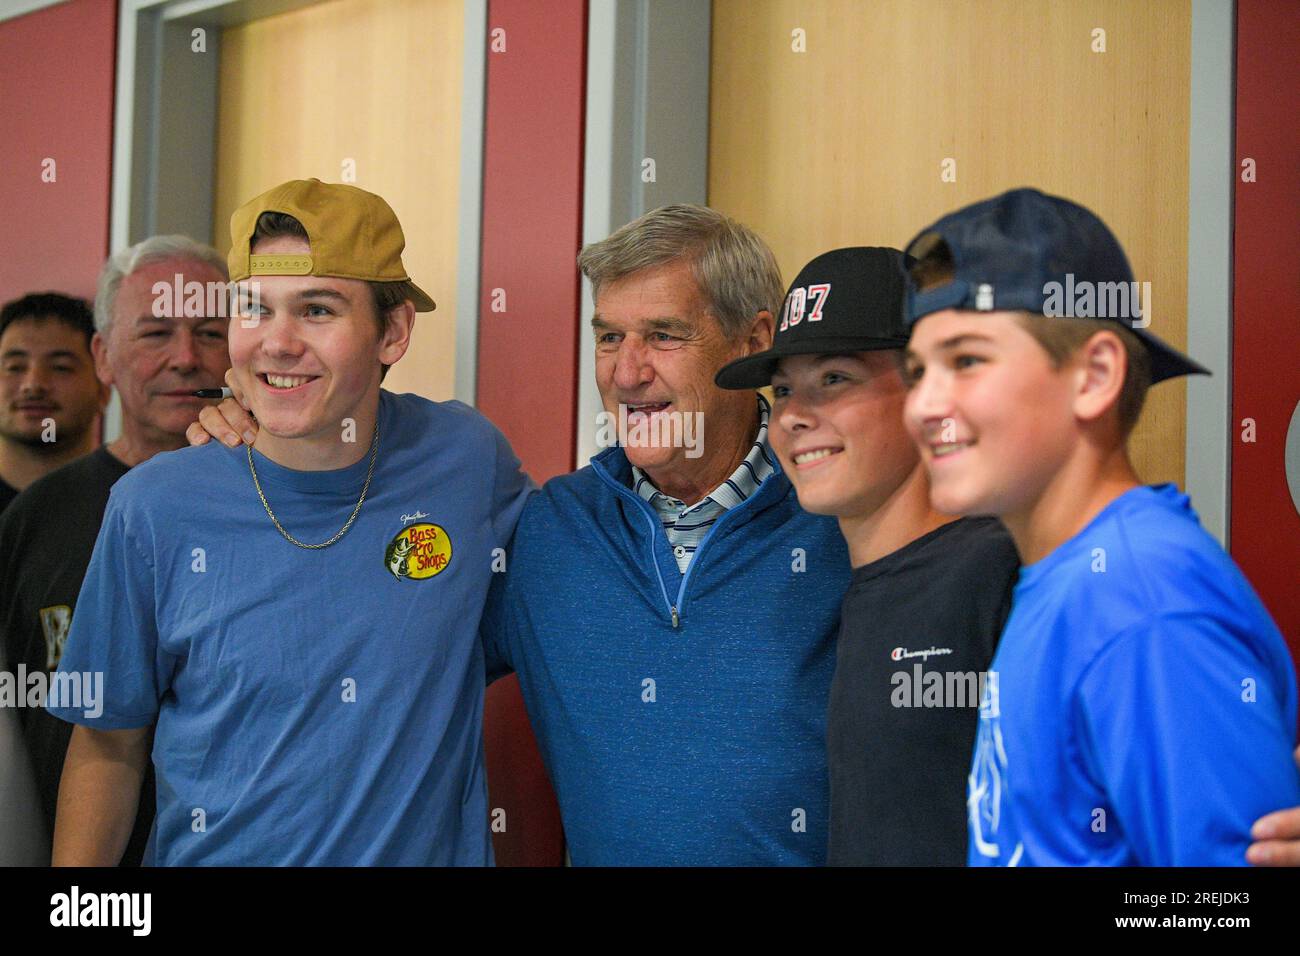 BOSTON, MA - JULY 26: Bobby Orr, Hockey Hall of Fame member who also won  two Stanley Cup championships with the Boston Bruins (second from right),  poses for a photo with fans